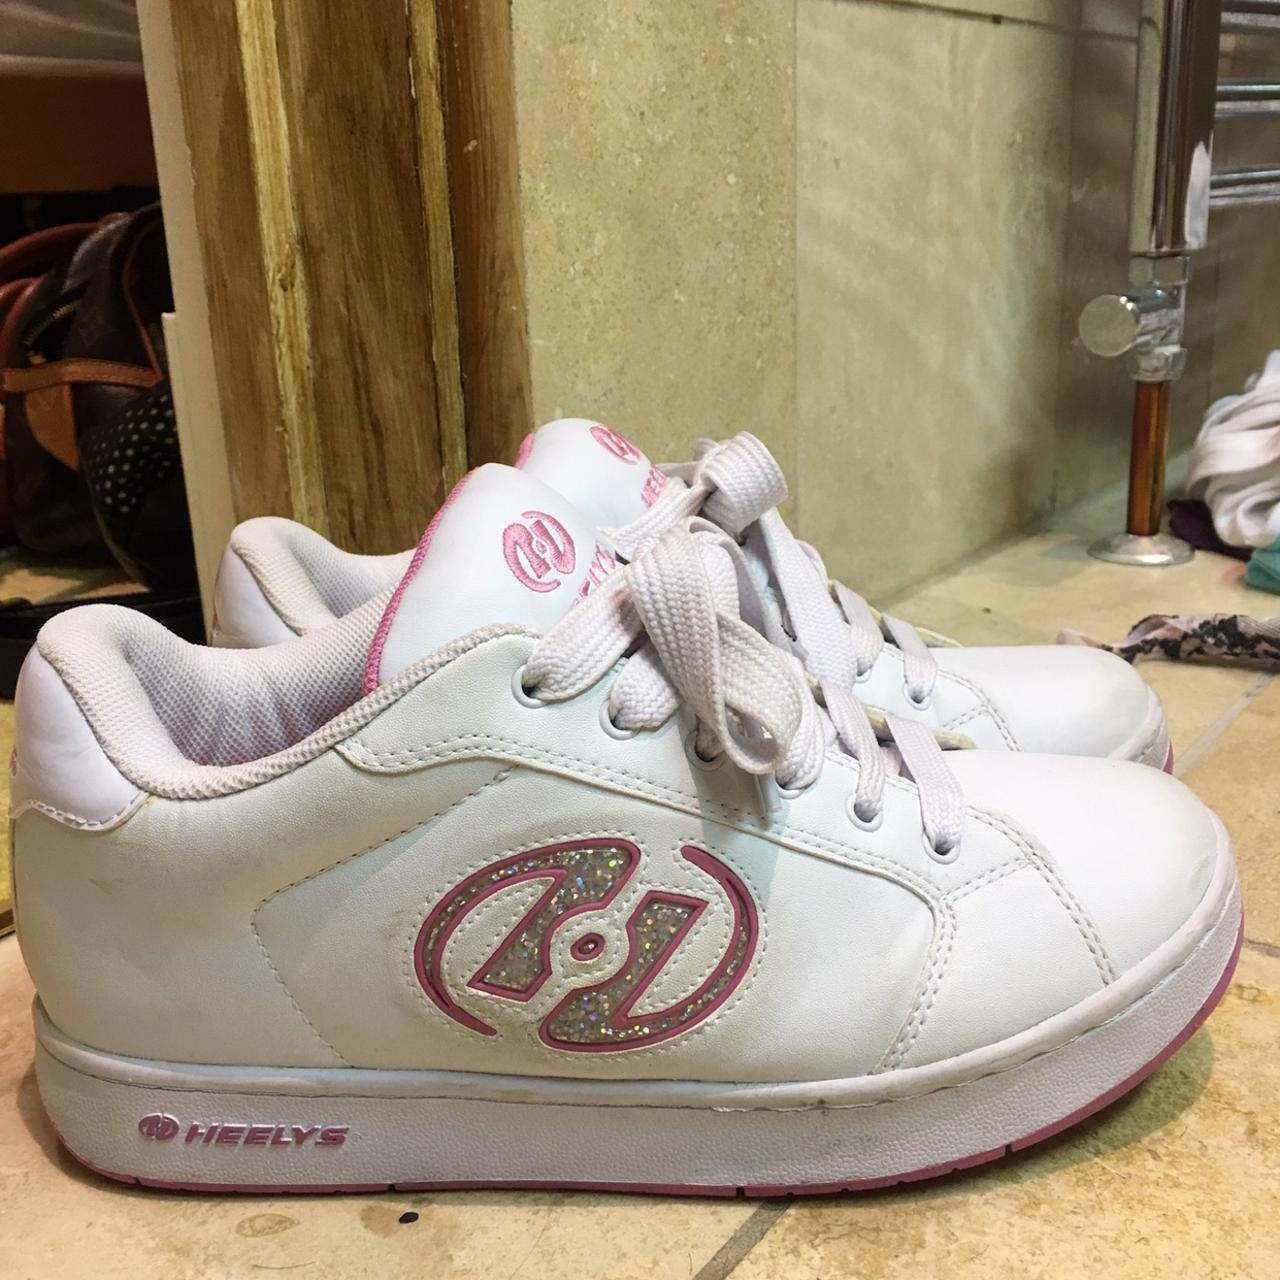 Pengg Y2K heelys/skater shoes (without the wheel) //